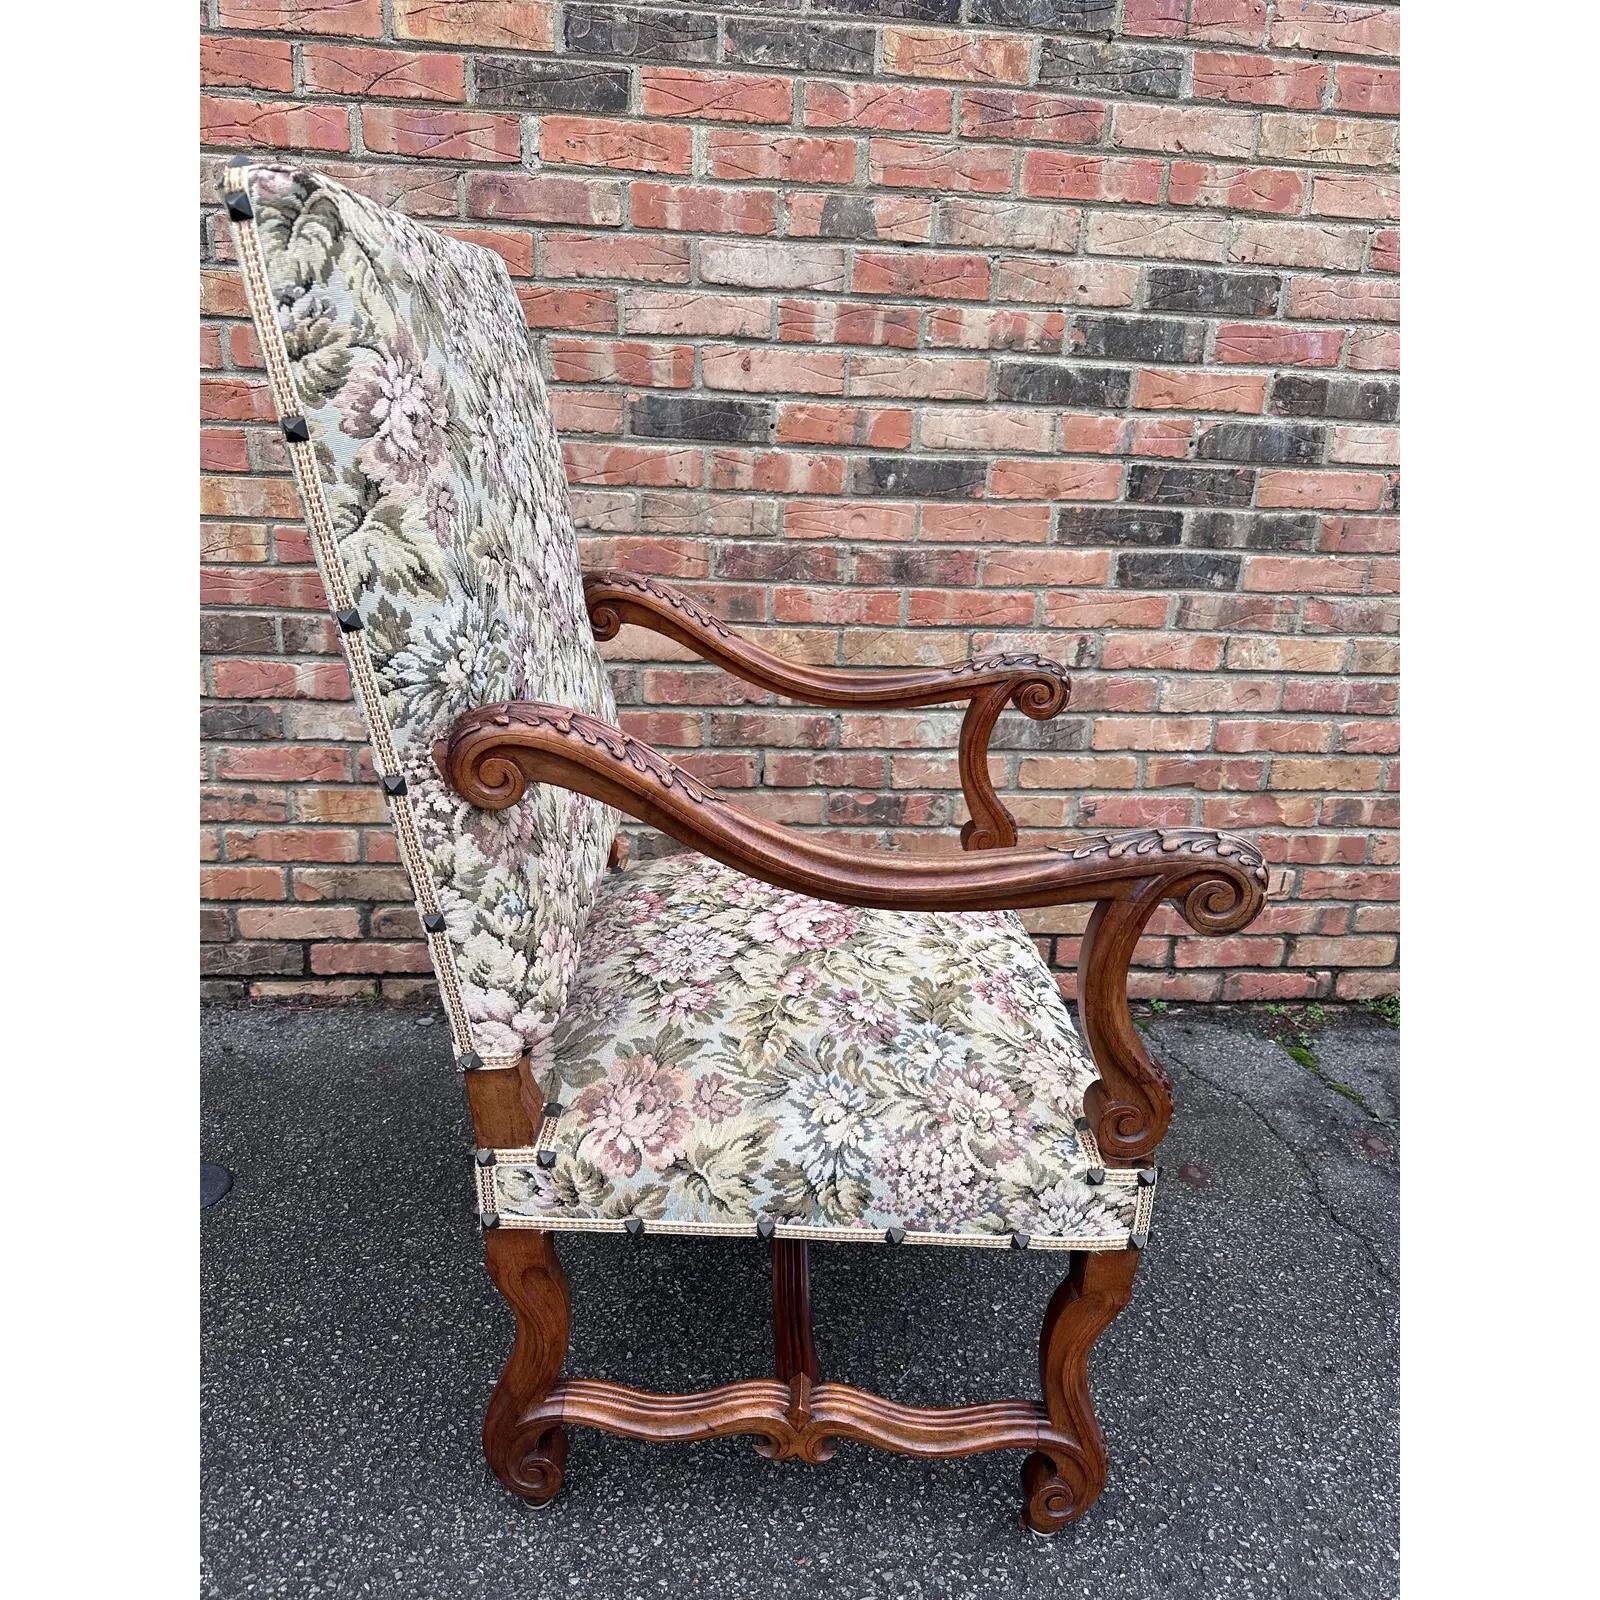 This is a beautiful antique needle point chair! They have been adorned in in hues in soft green and rose tones and pair wonderfully with the rich wood. The arms and legs have stunning hand carved designs that are immediately eye-catching. These